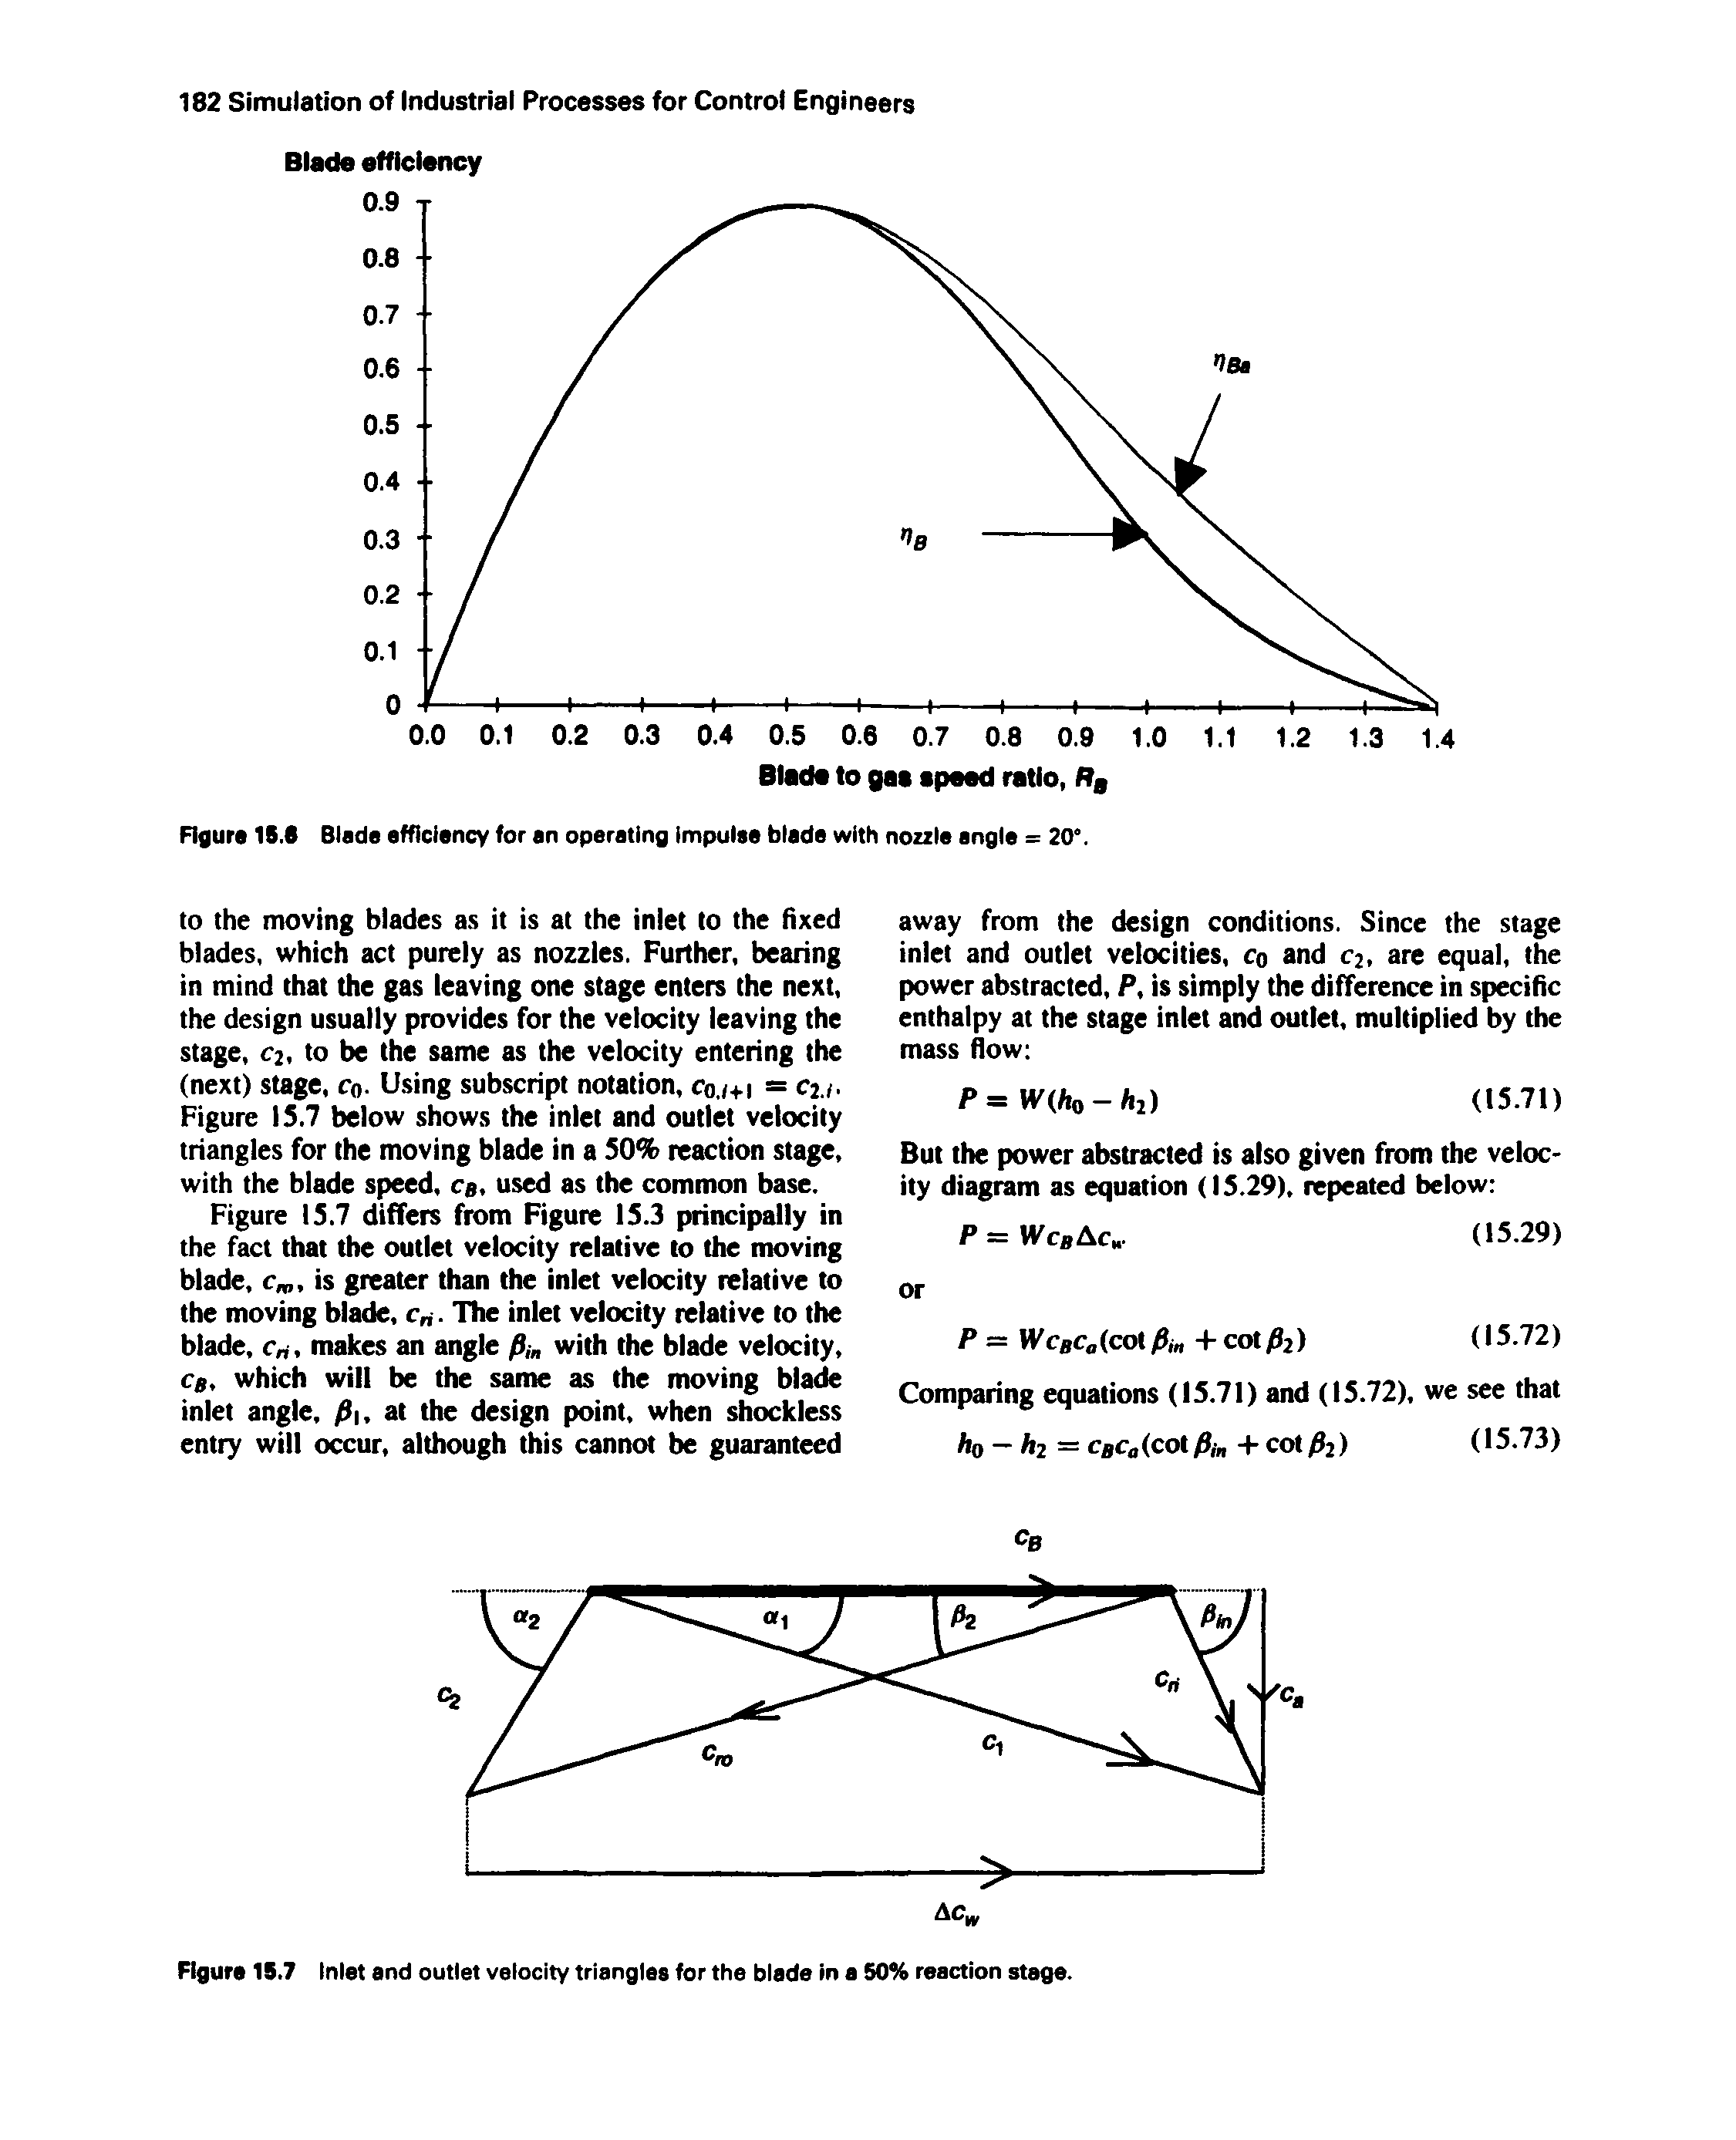 Figure 1S.S Blade efficiency for an operating impulee blade with nozzle angle = 20°.